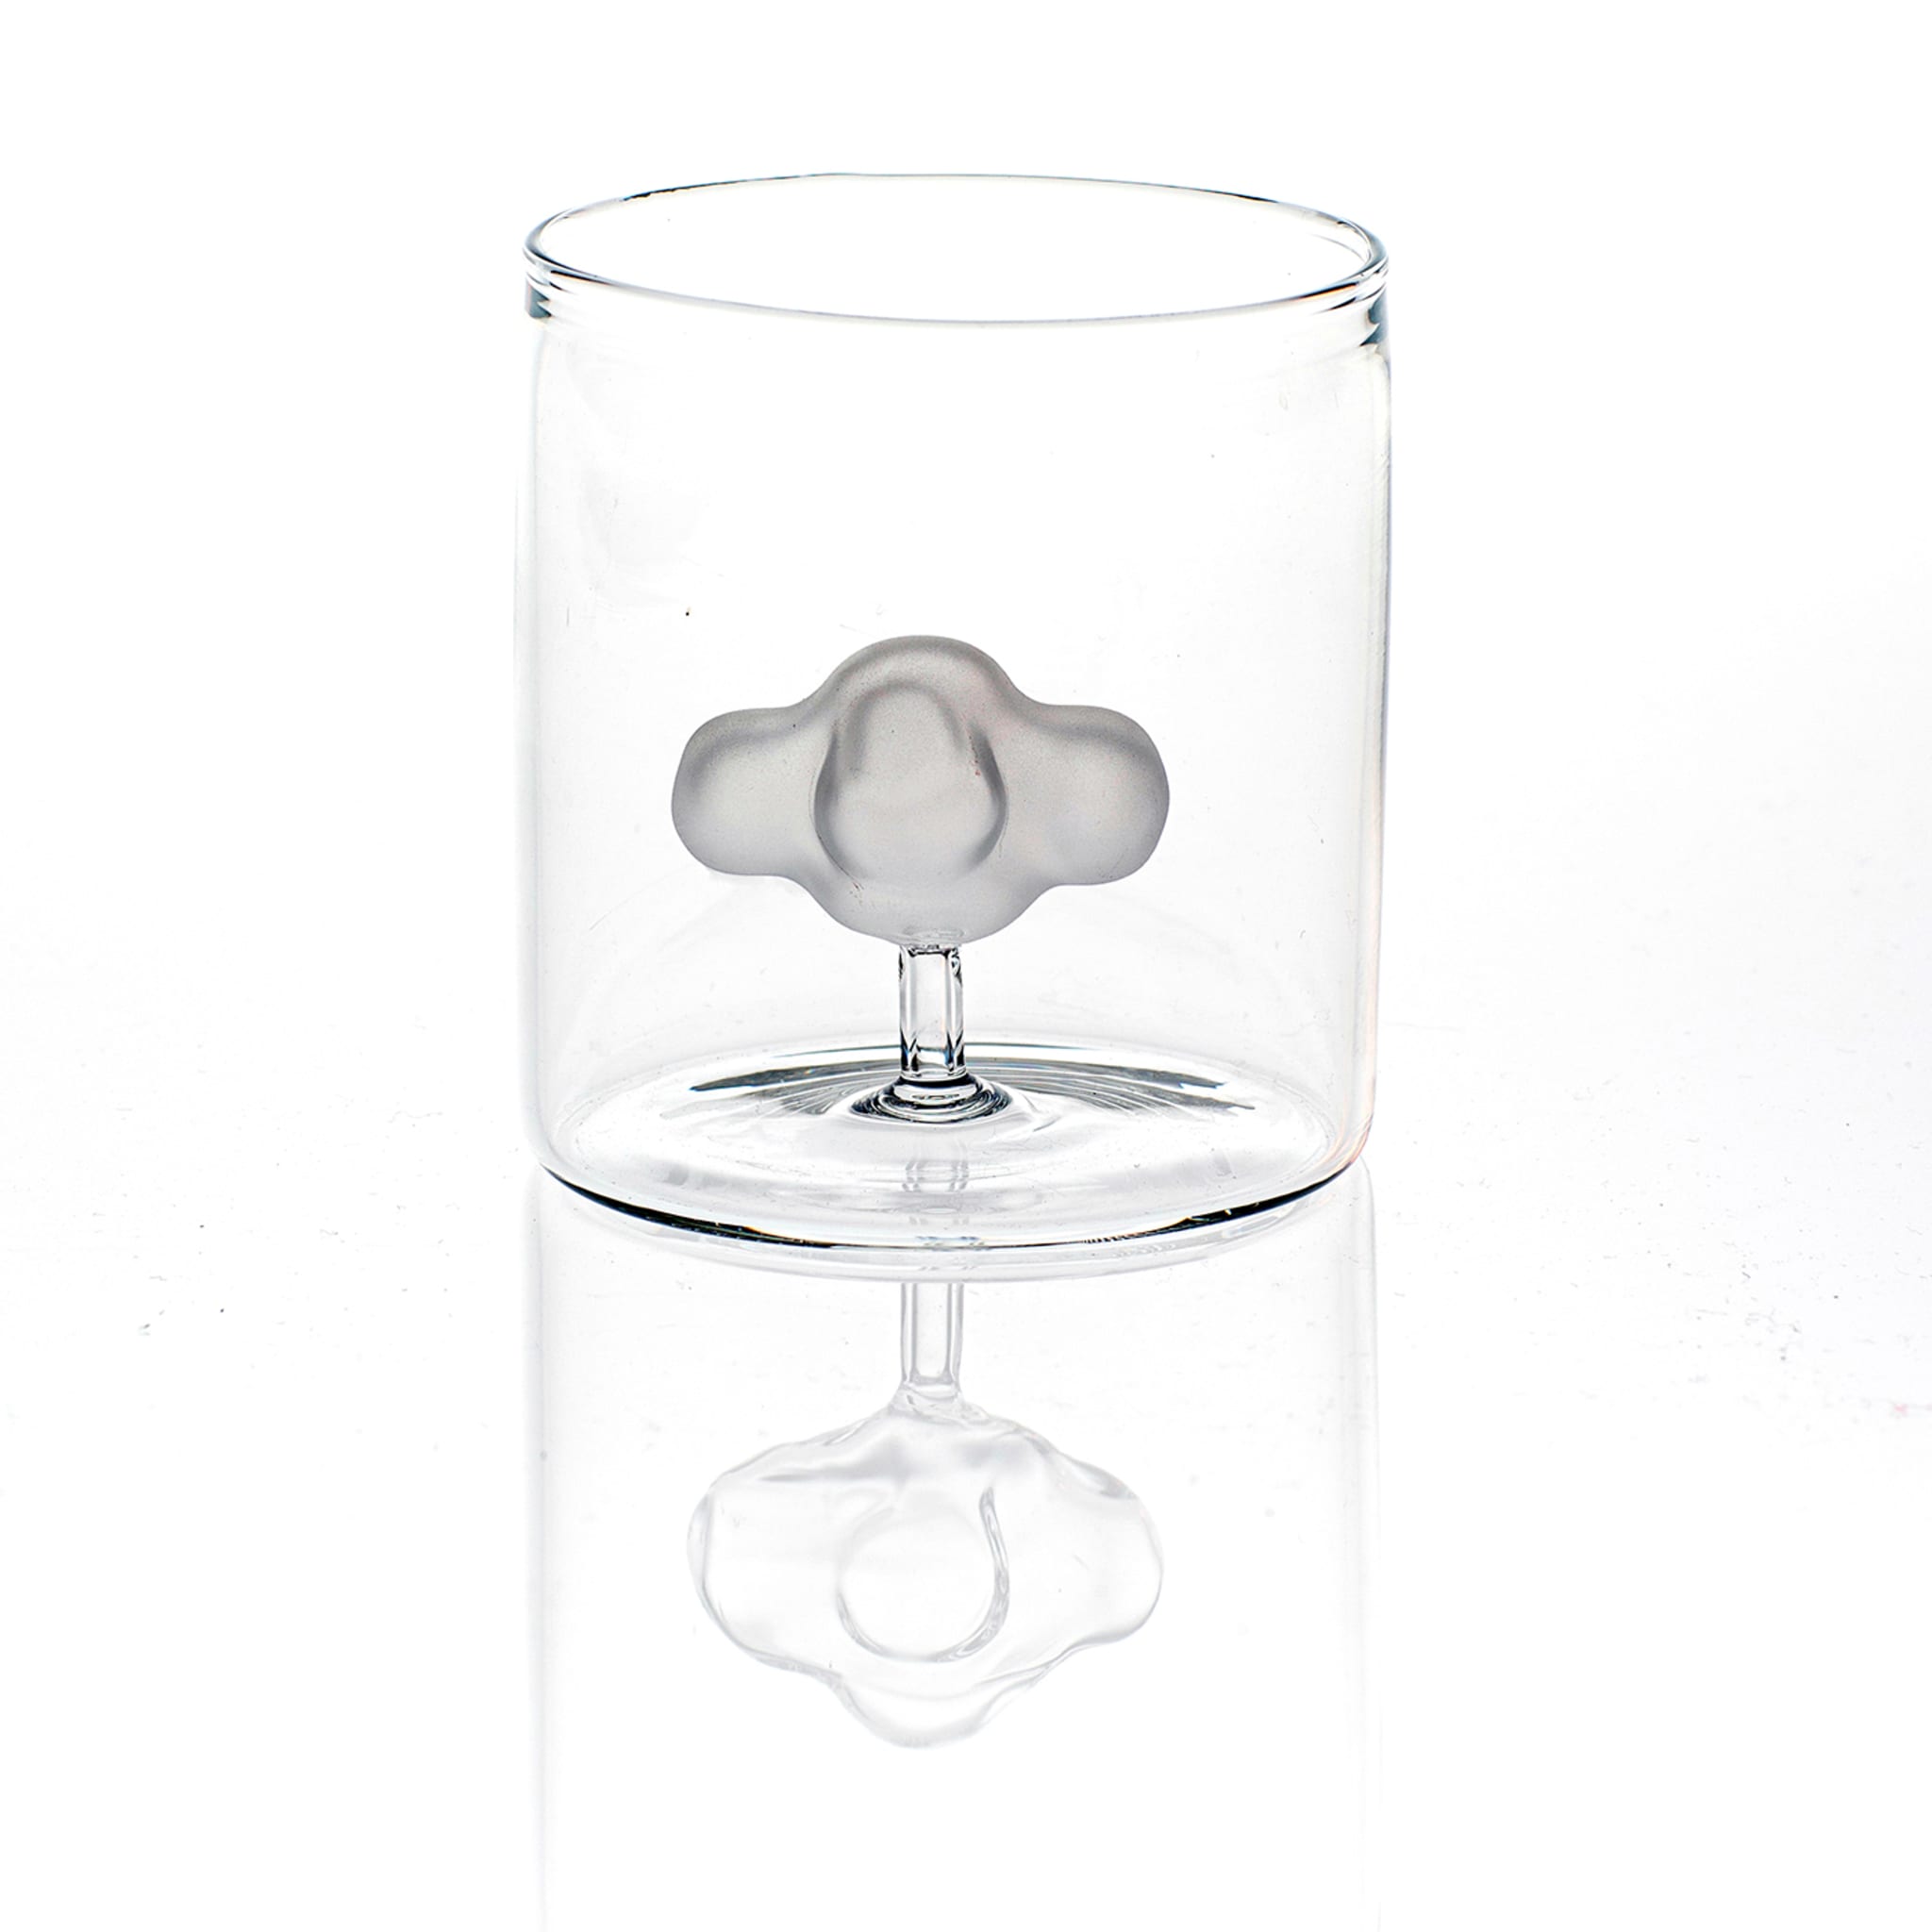 Set of 4 Clouds Glasses - Alternative view 1